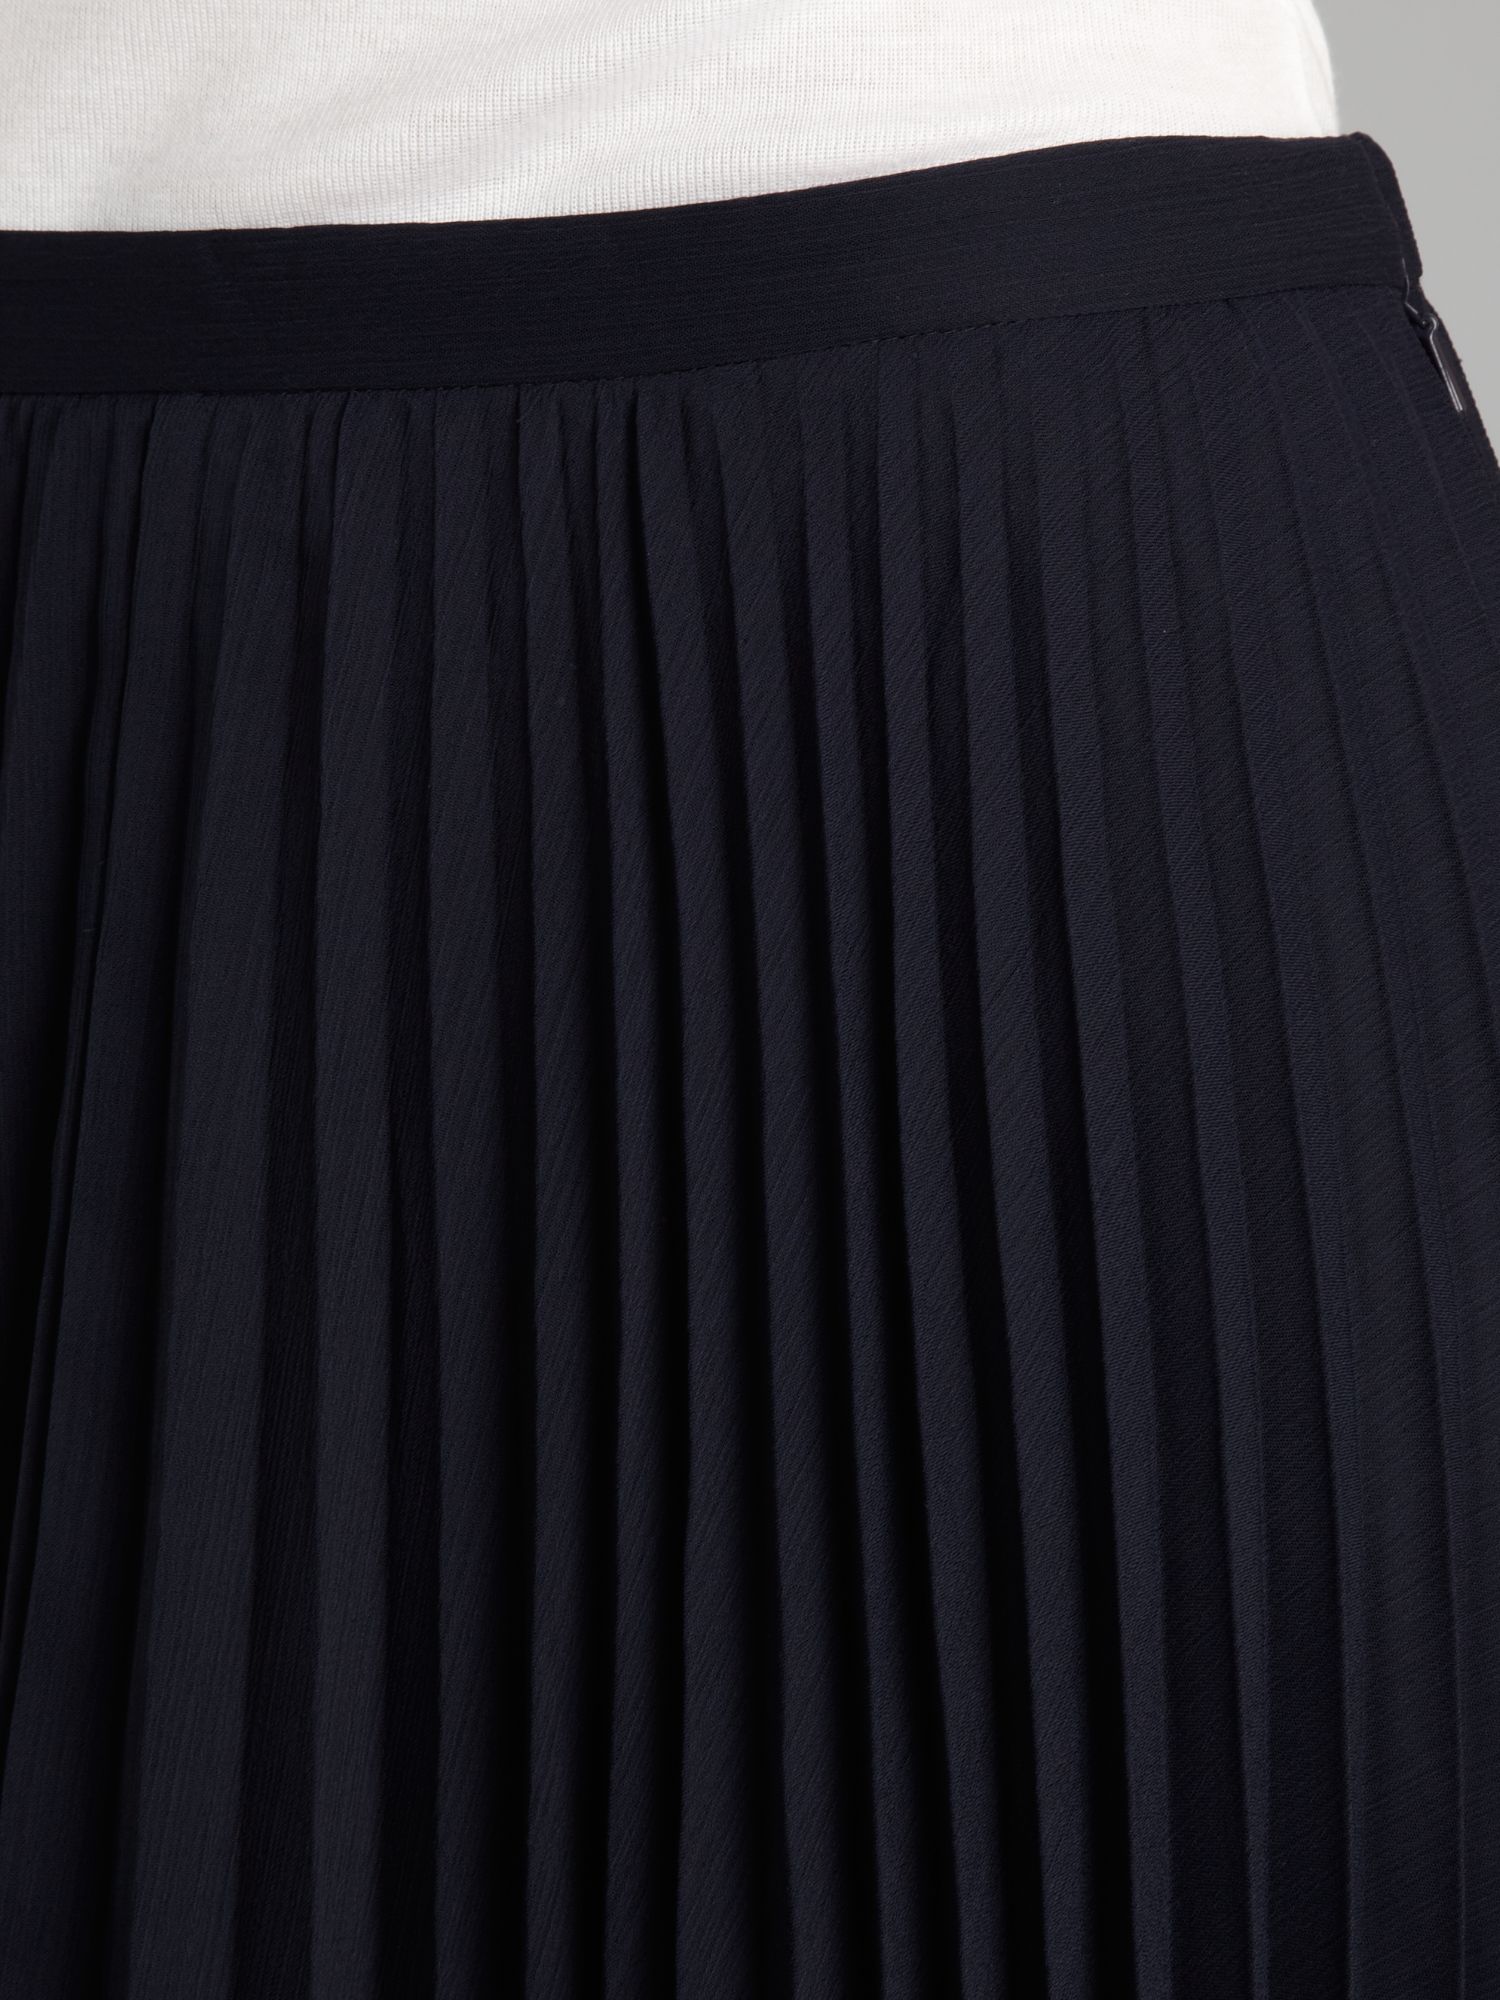 Whistles Carrie Pleated Skirt in Blue | Lyst